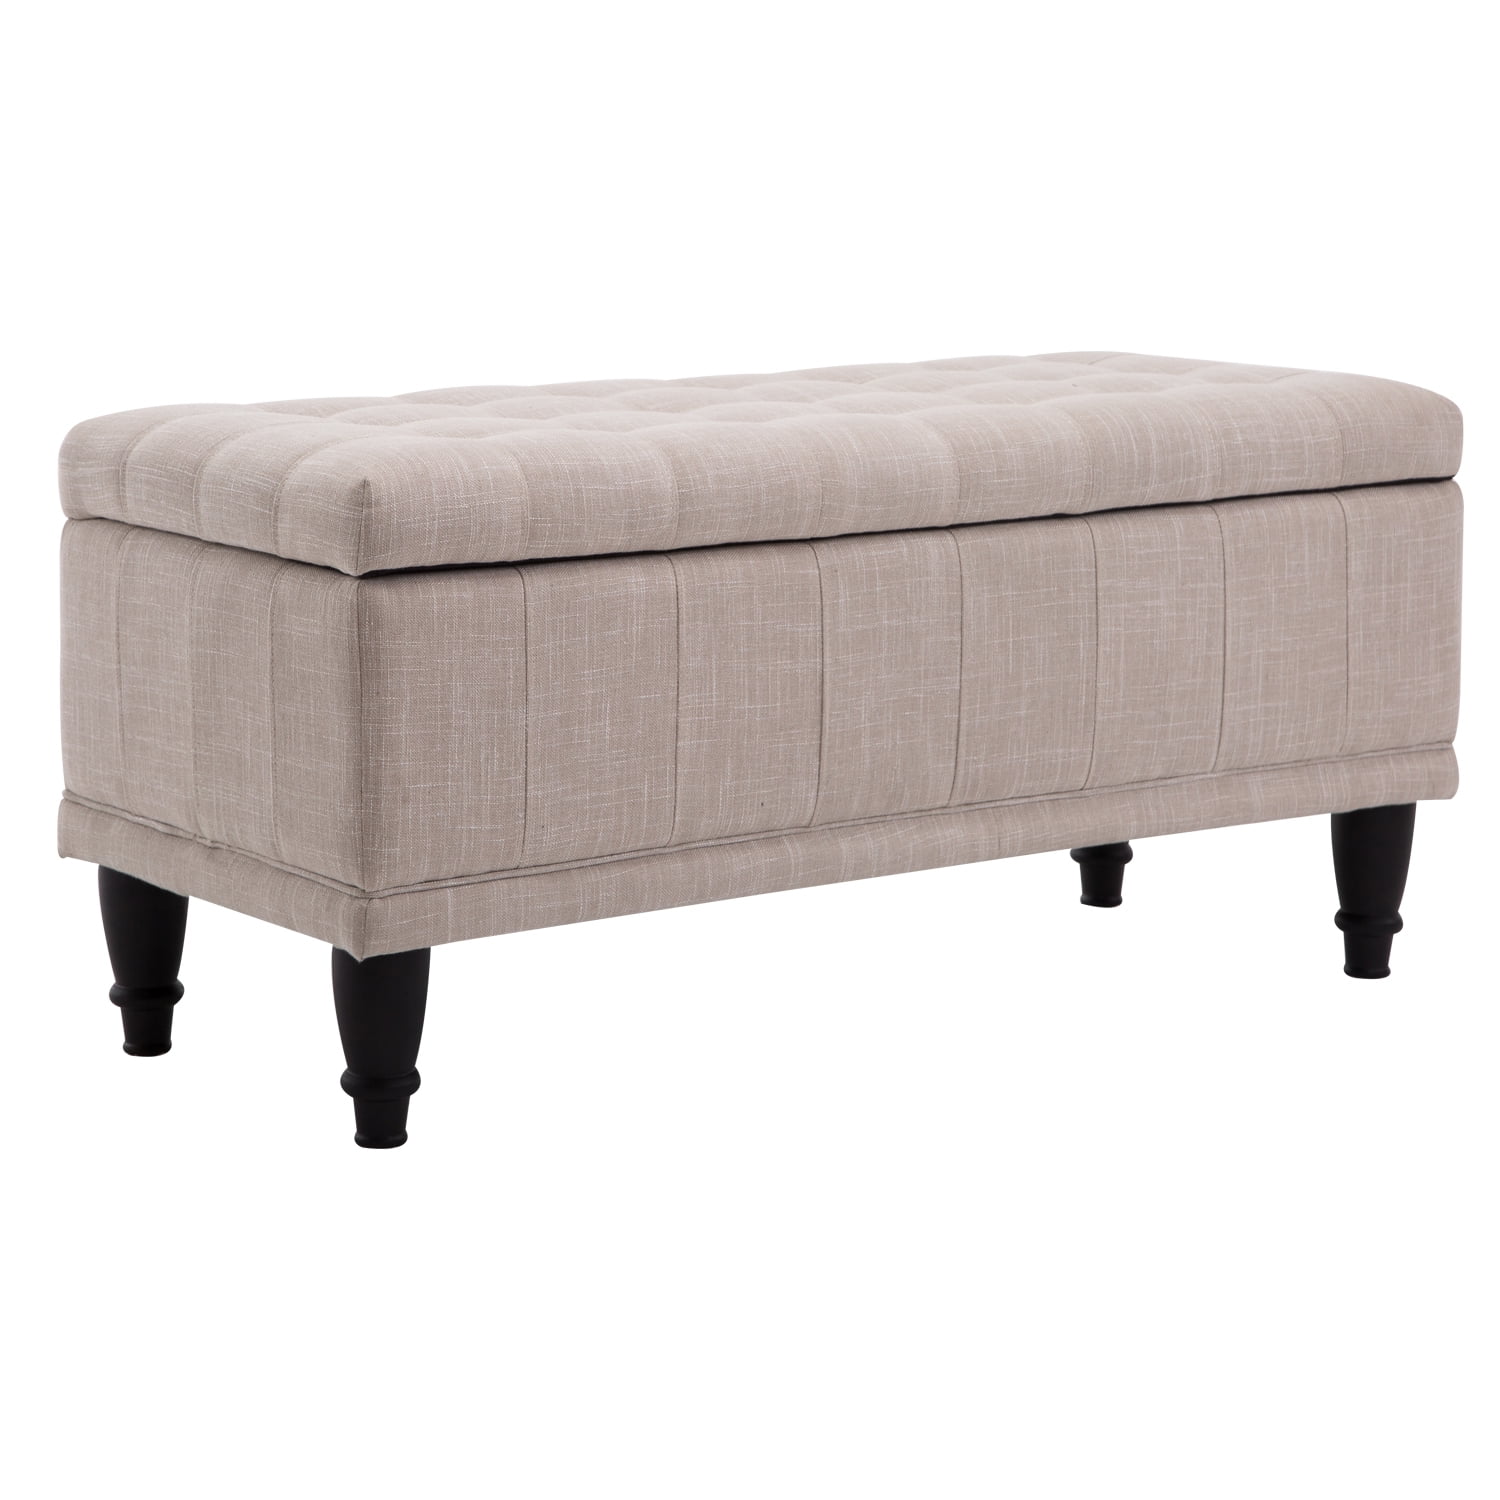 HOMCOM Linen Storage Ottoman Bench Lift Top Tufted Rectangle Ottoman for Living Room Entryway Grey or Bedroom